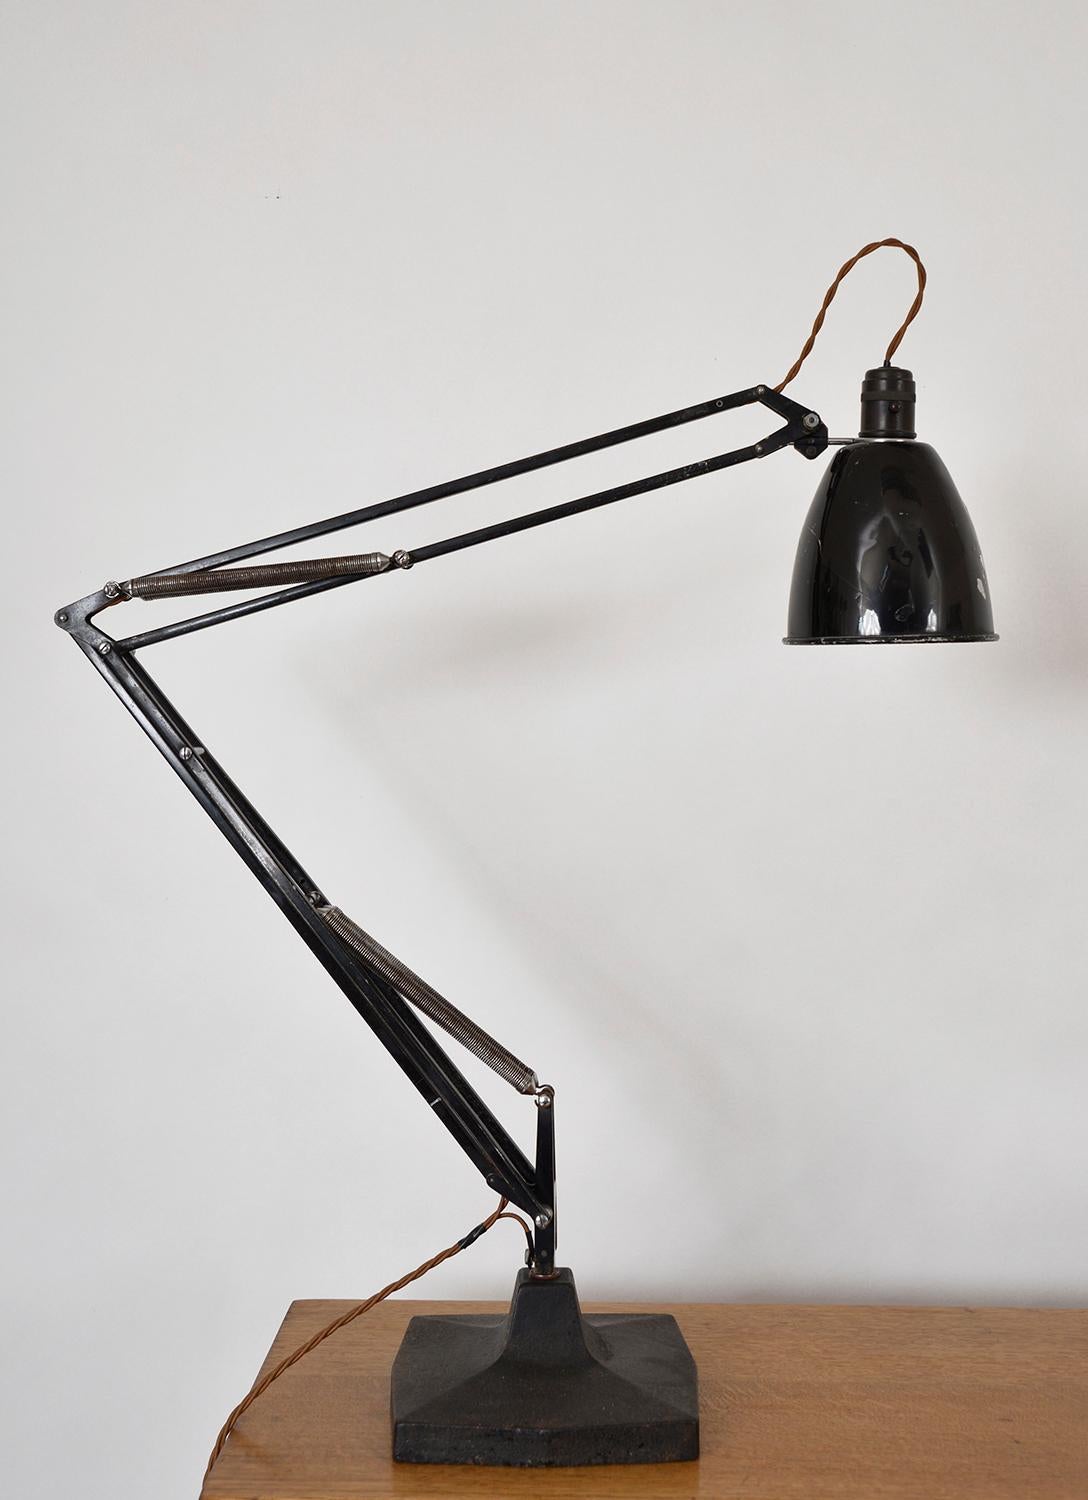 The ultimate in desk lamps – a very genuine Post War four-spring model 1209 Anglepoise draughtsman’s task lamp manufactured by Herbert Terry & Sons, Redditch, England. 
‘The Anglepoise’, designed by George Carwardine in 1933, revolutionized task